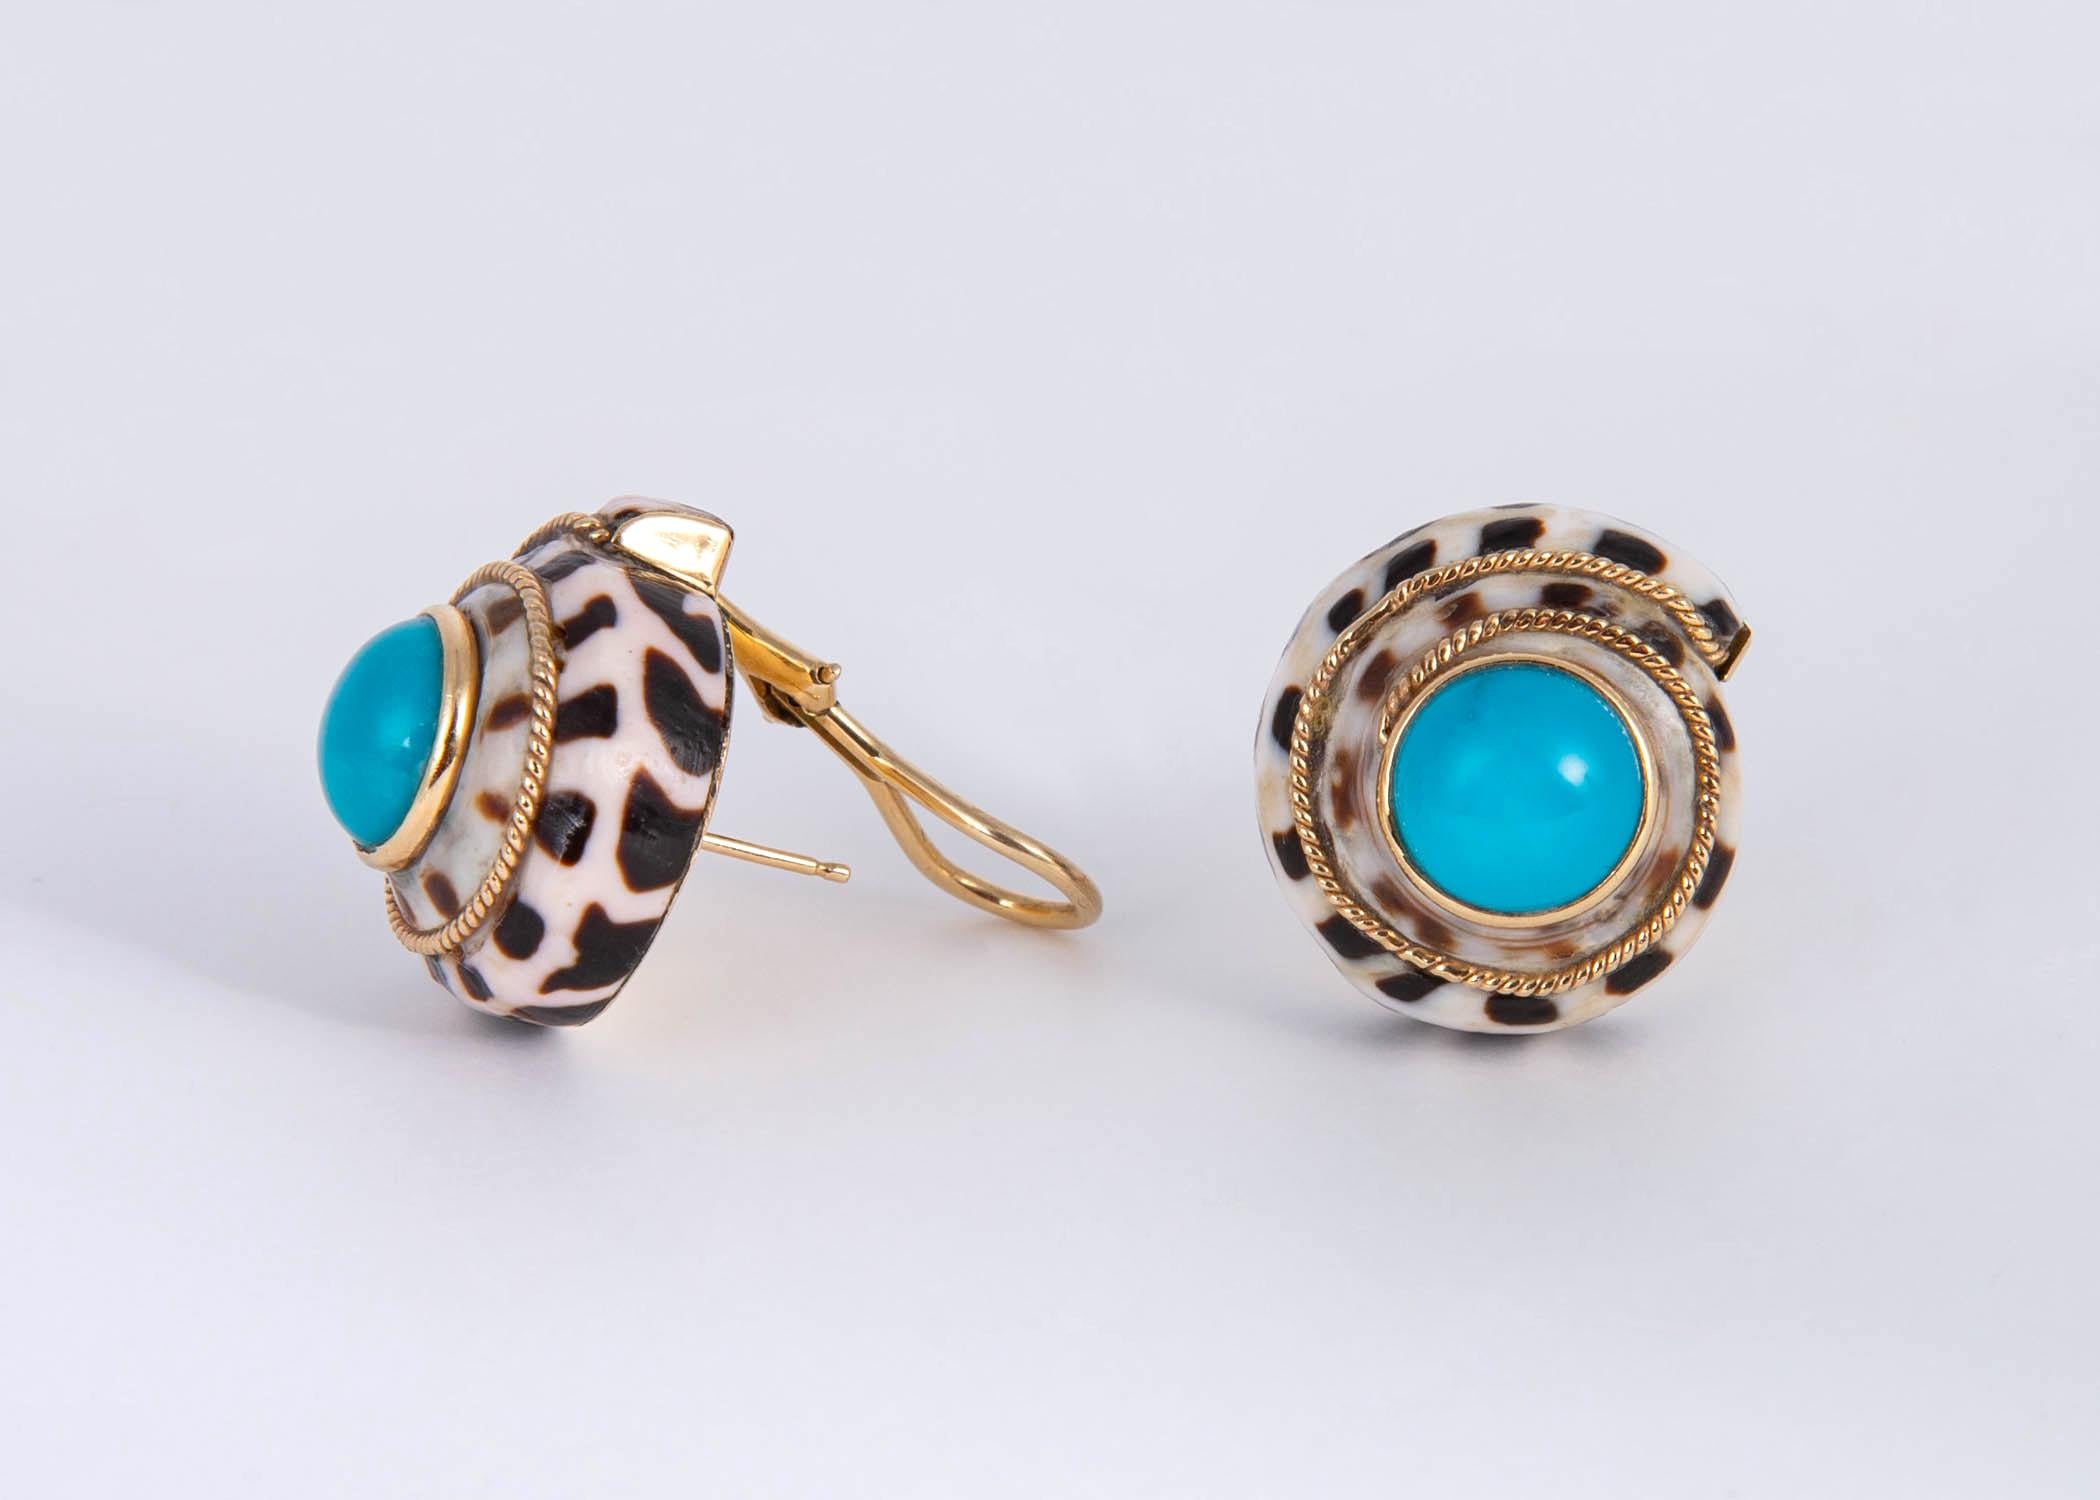 MAZ is famous for there beautiful shell earrings. This pair features a wonderful brown and white shell paired with rich turquoise centers. 7/8's of an inch. Wearable and Chic !!!